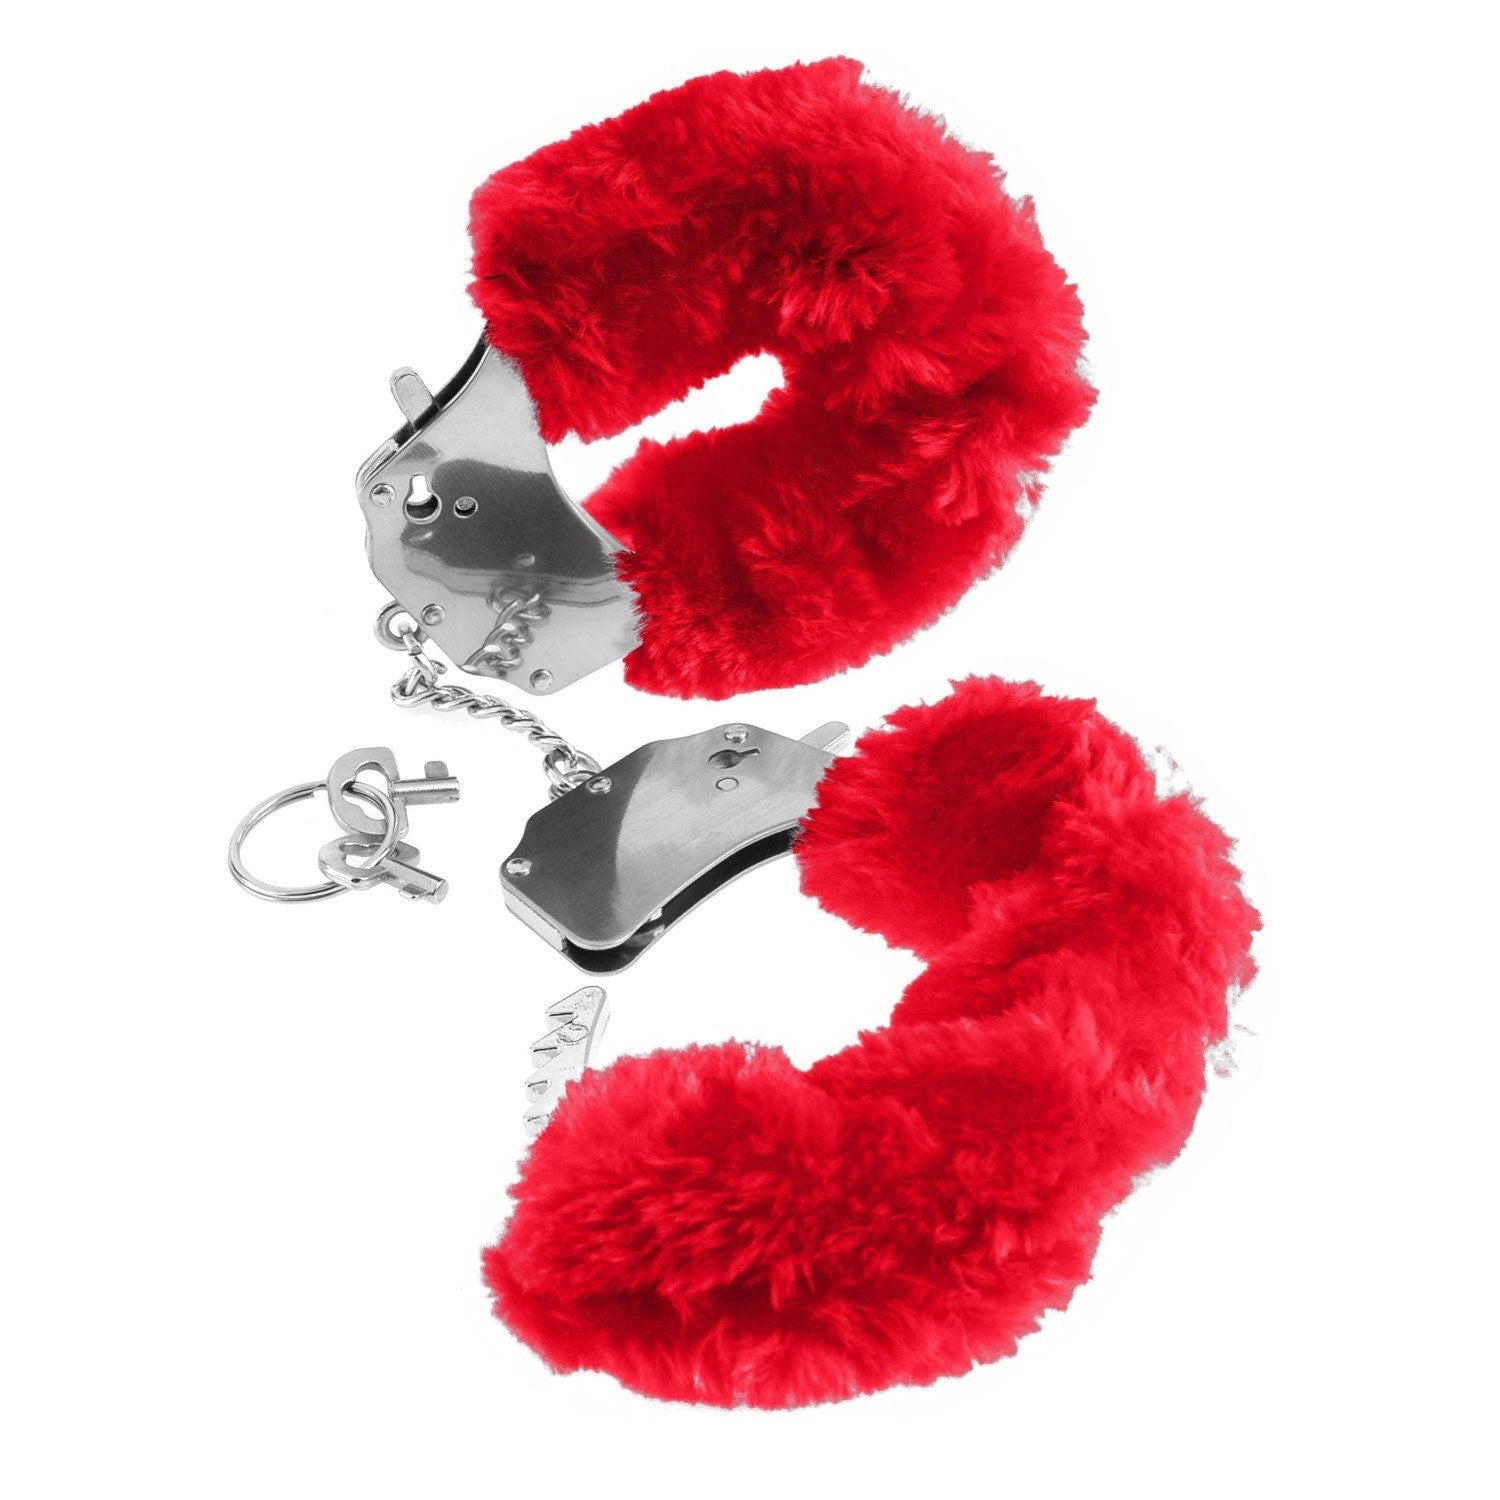 Fetish Fantasy Series Furry Cuffs - Red Fluffy Hand Cuffs by Pipedream